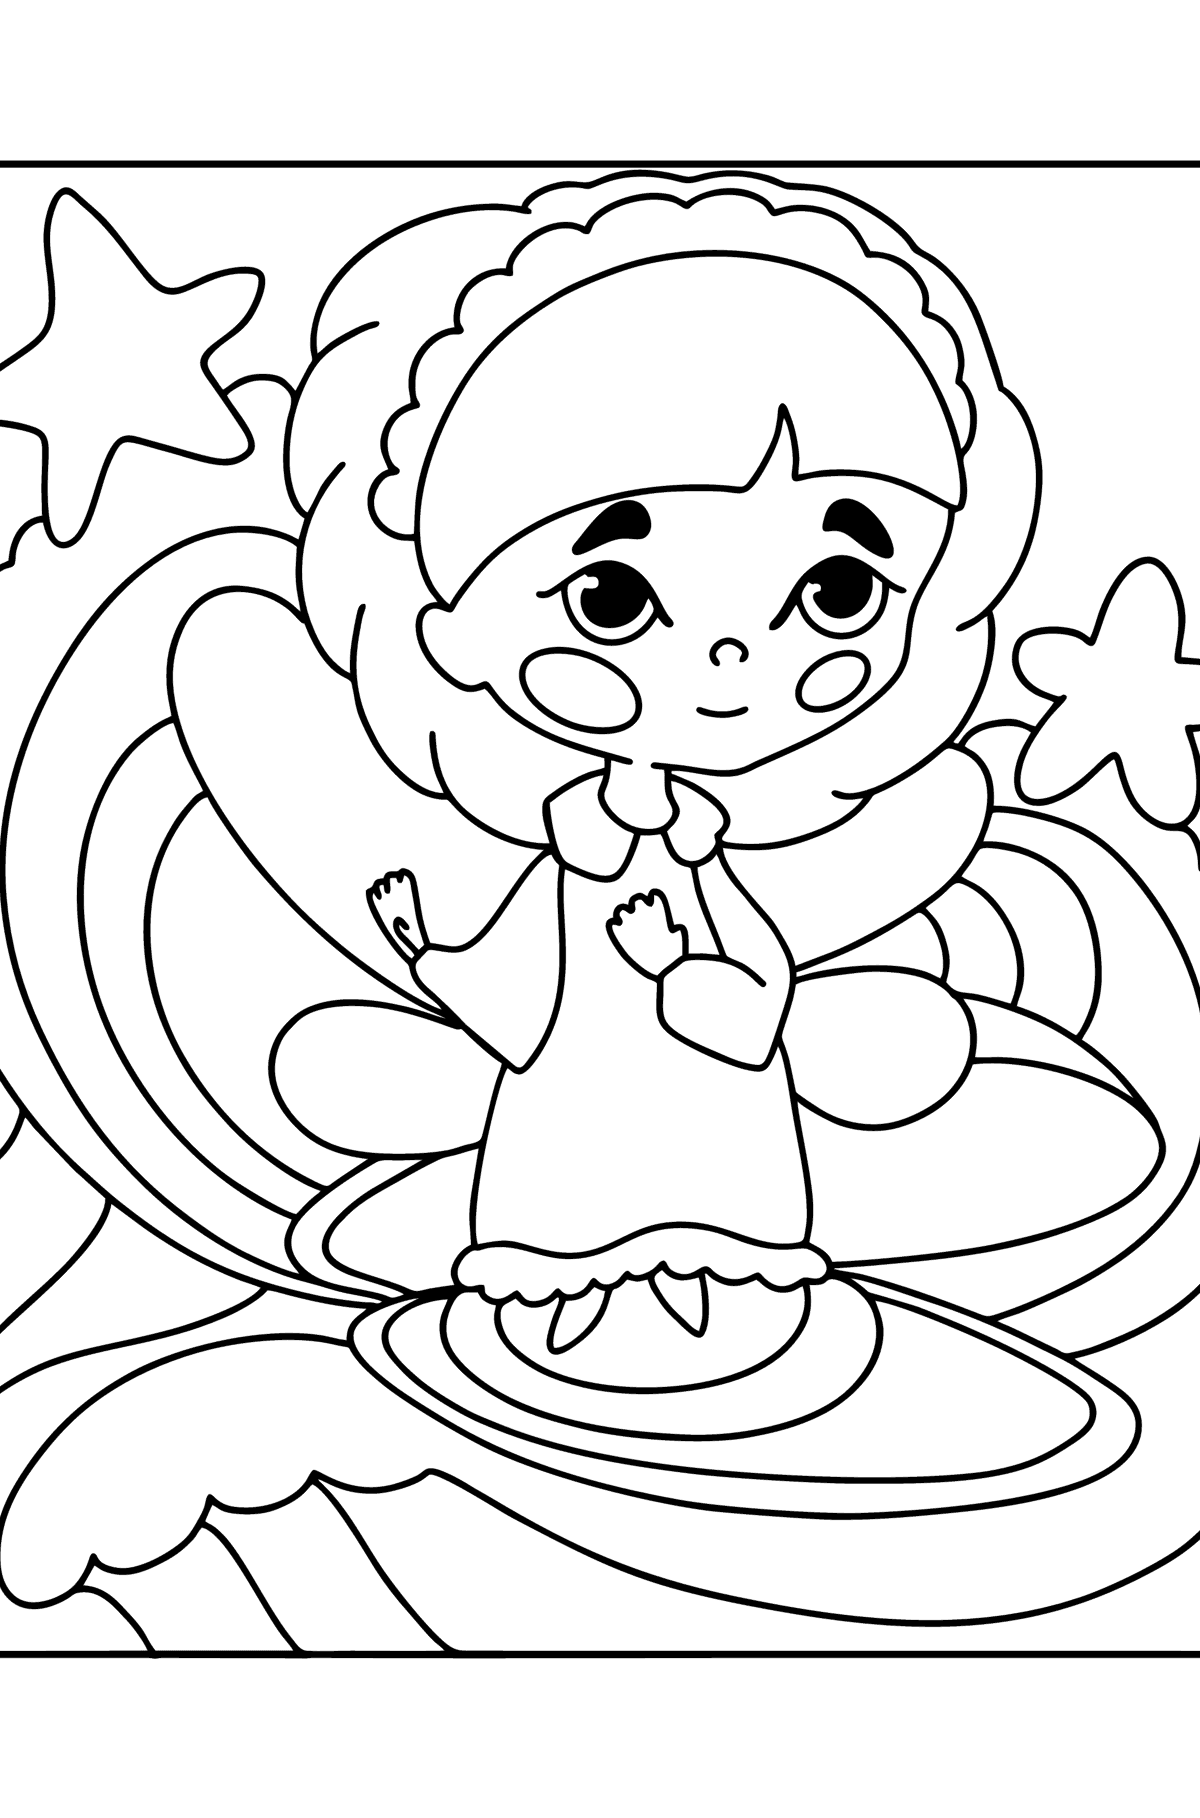 Sea Fairy coloring page - Coloring Pages for Kids